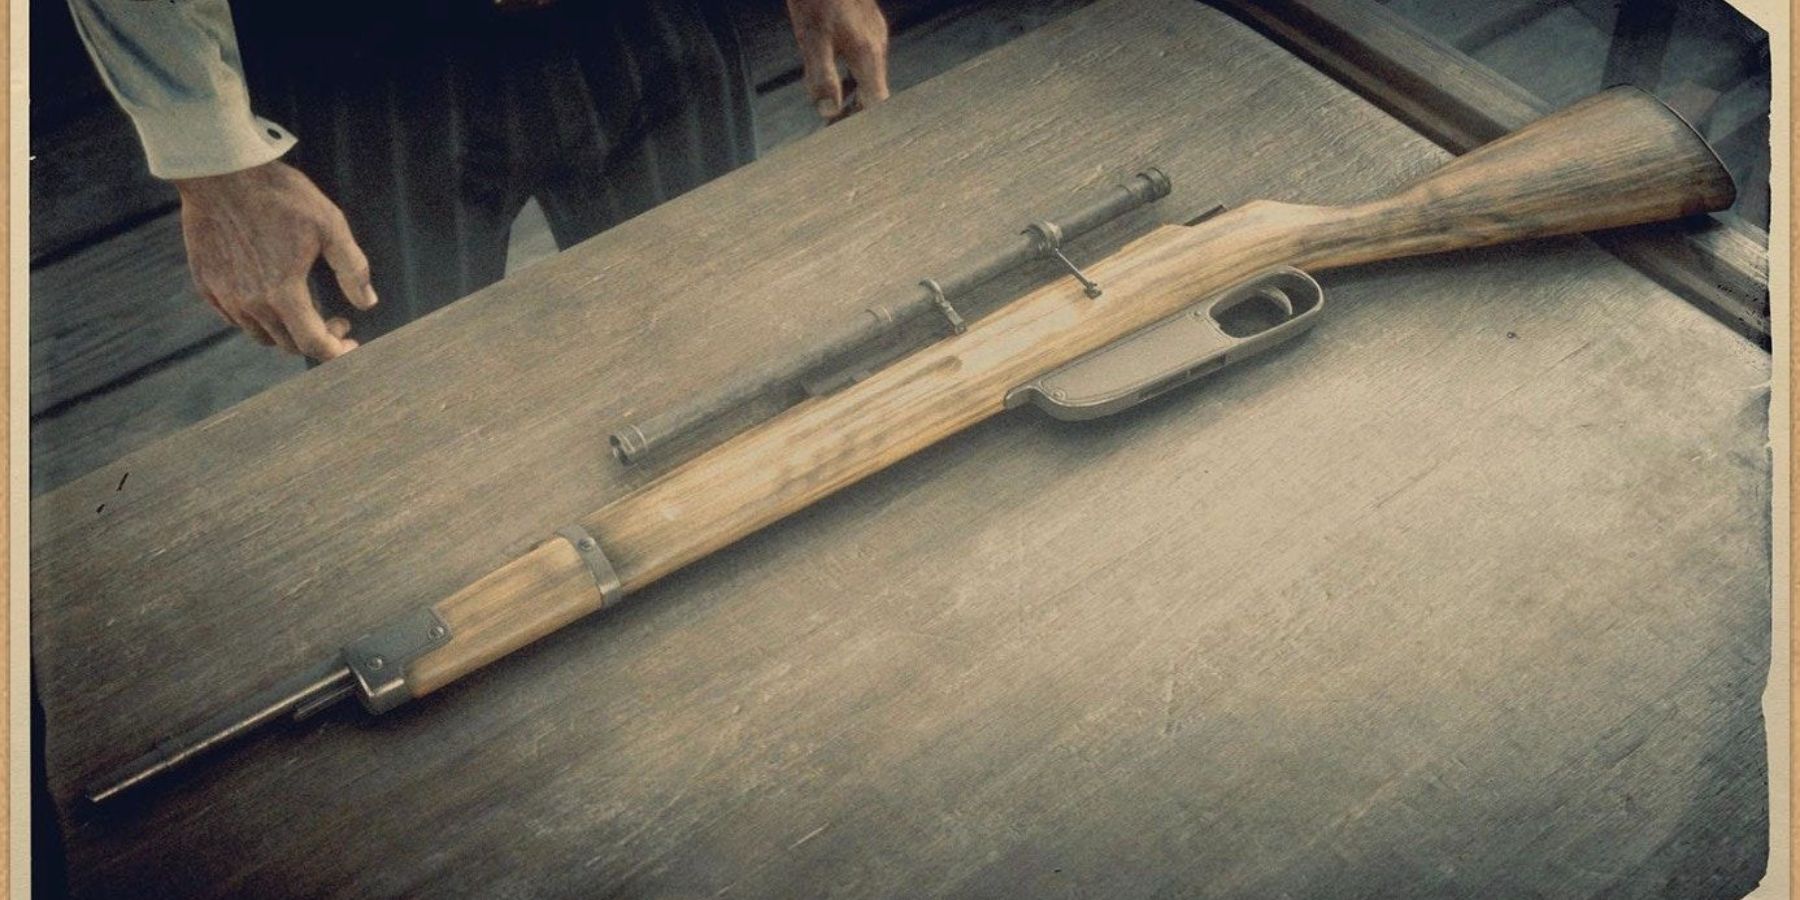 RDR2 Red Dead online a closeup of the Carcano Rifle